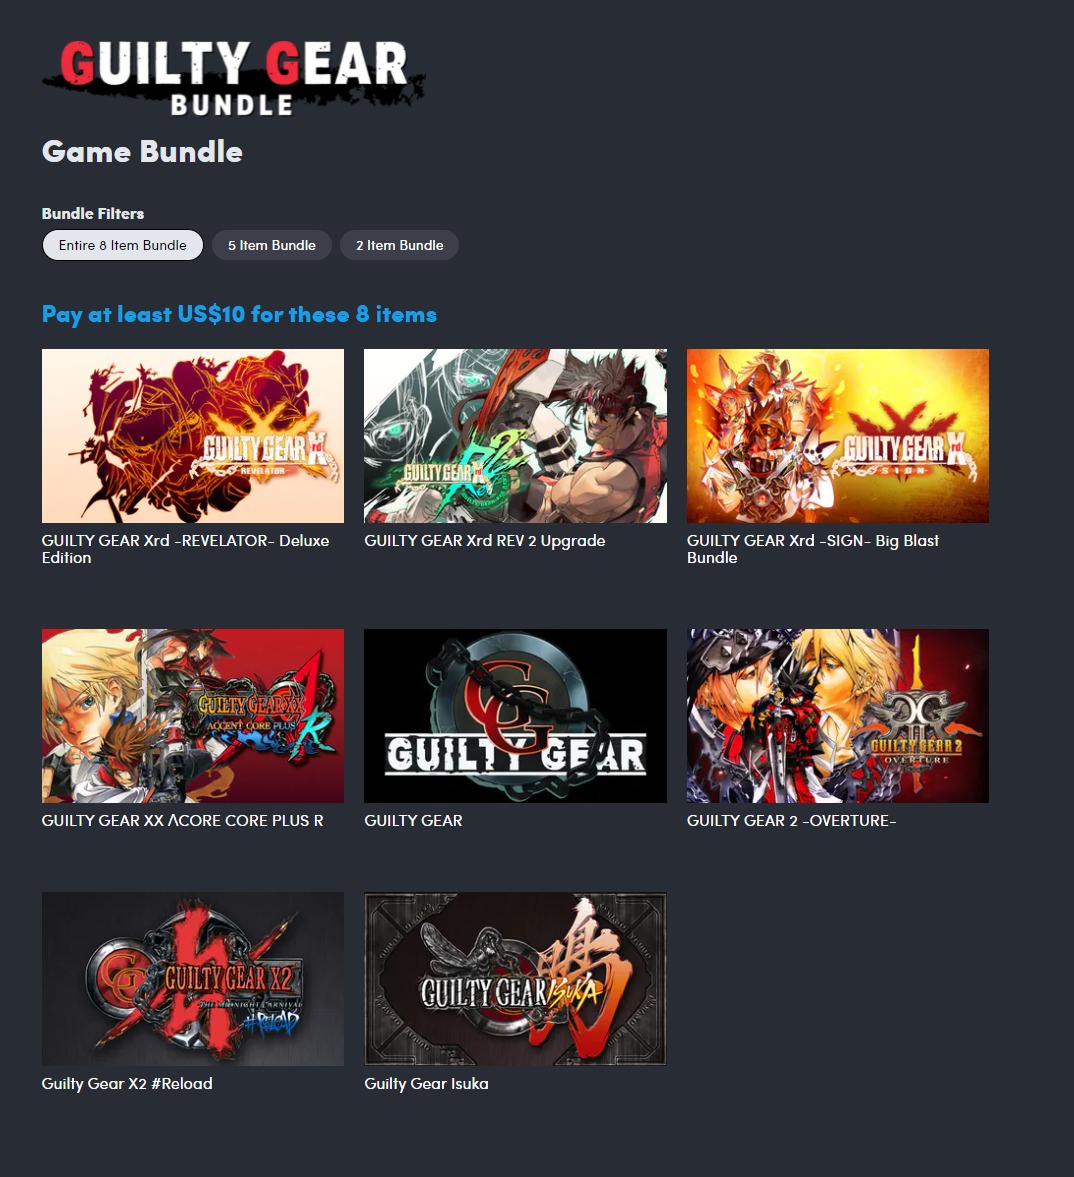 FireShot Capture 694 - Humble Guilty Gear Bundle (pay what you want and help charity)_ - www.humblebundle.com.jpg